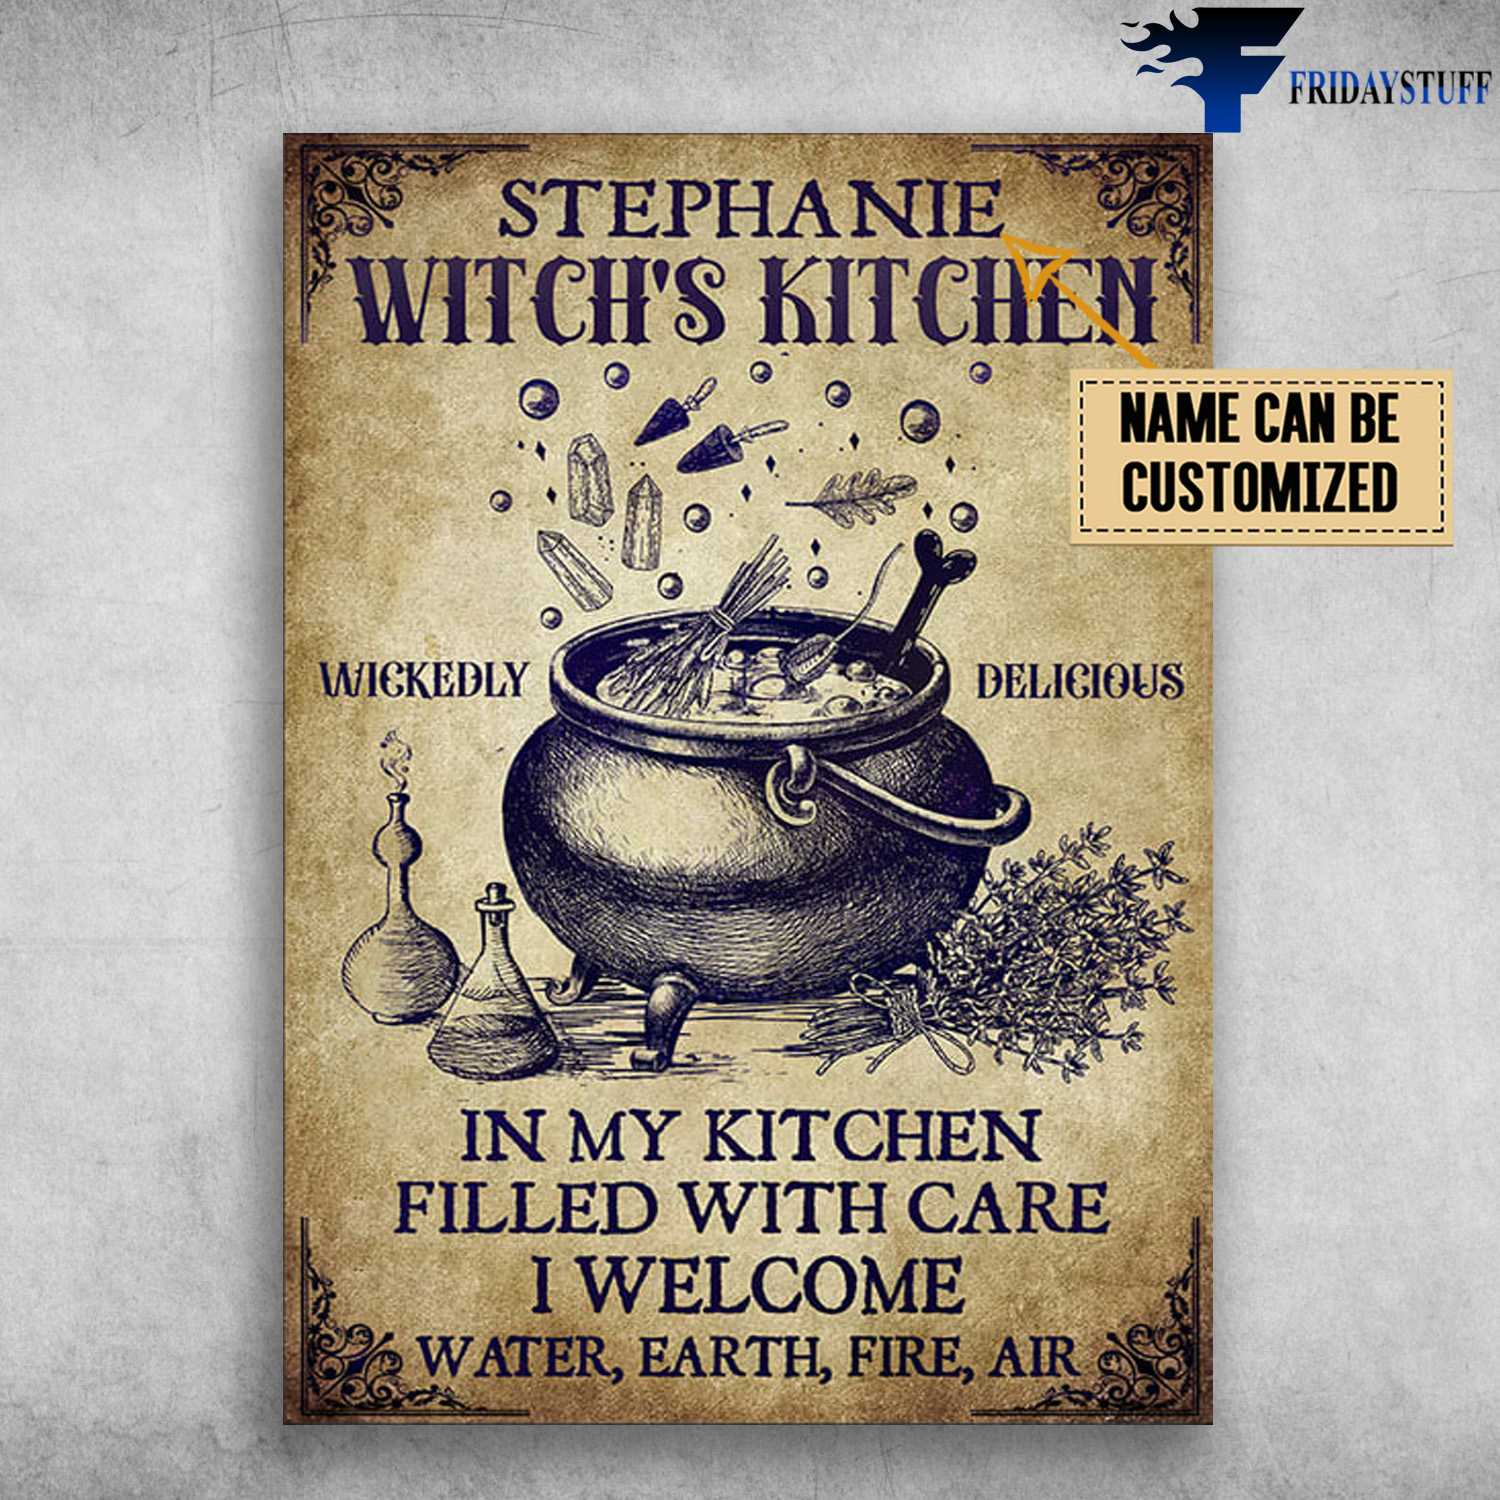 Witch's Kitchen, Wickedly Delicious, In My Chicken, Filled With Care, I Welcome Water, Earth, Fire, Air, Halloween Day